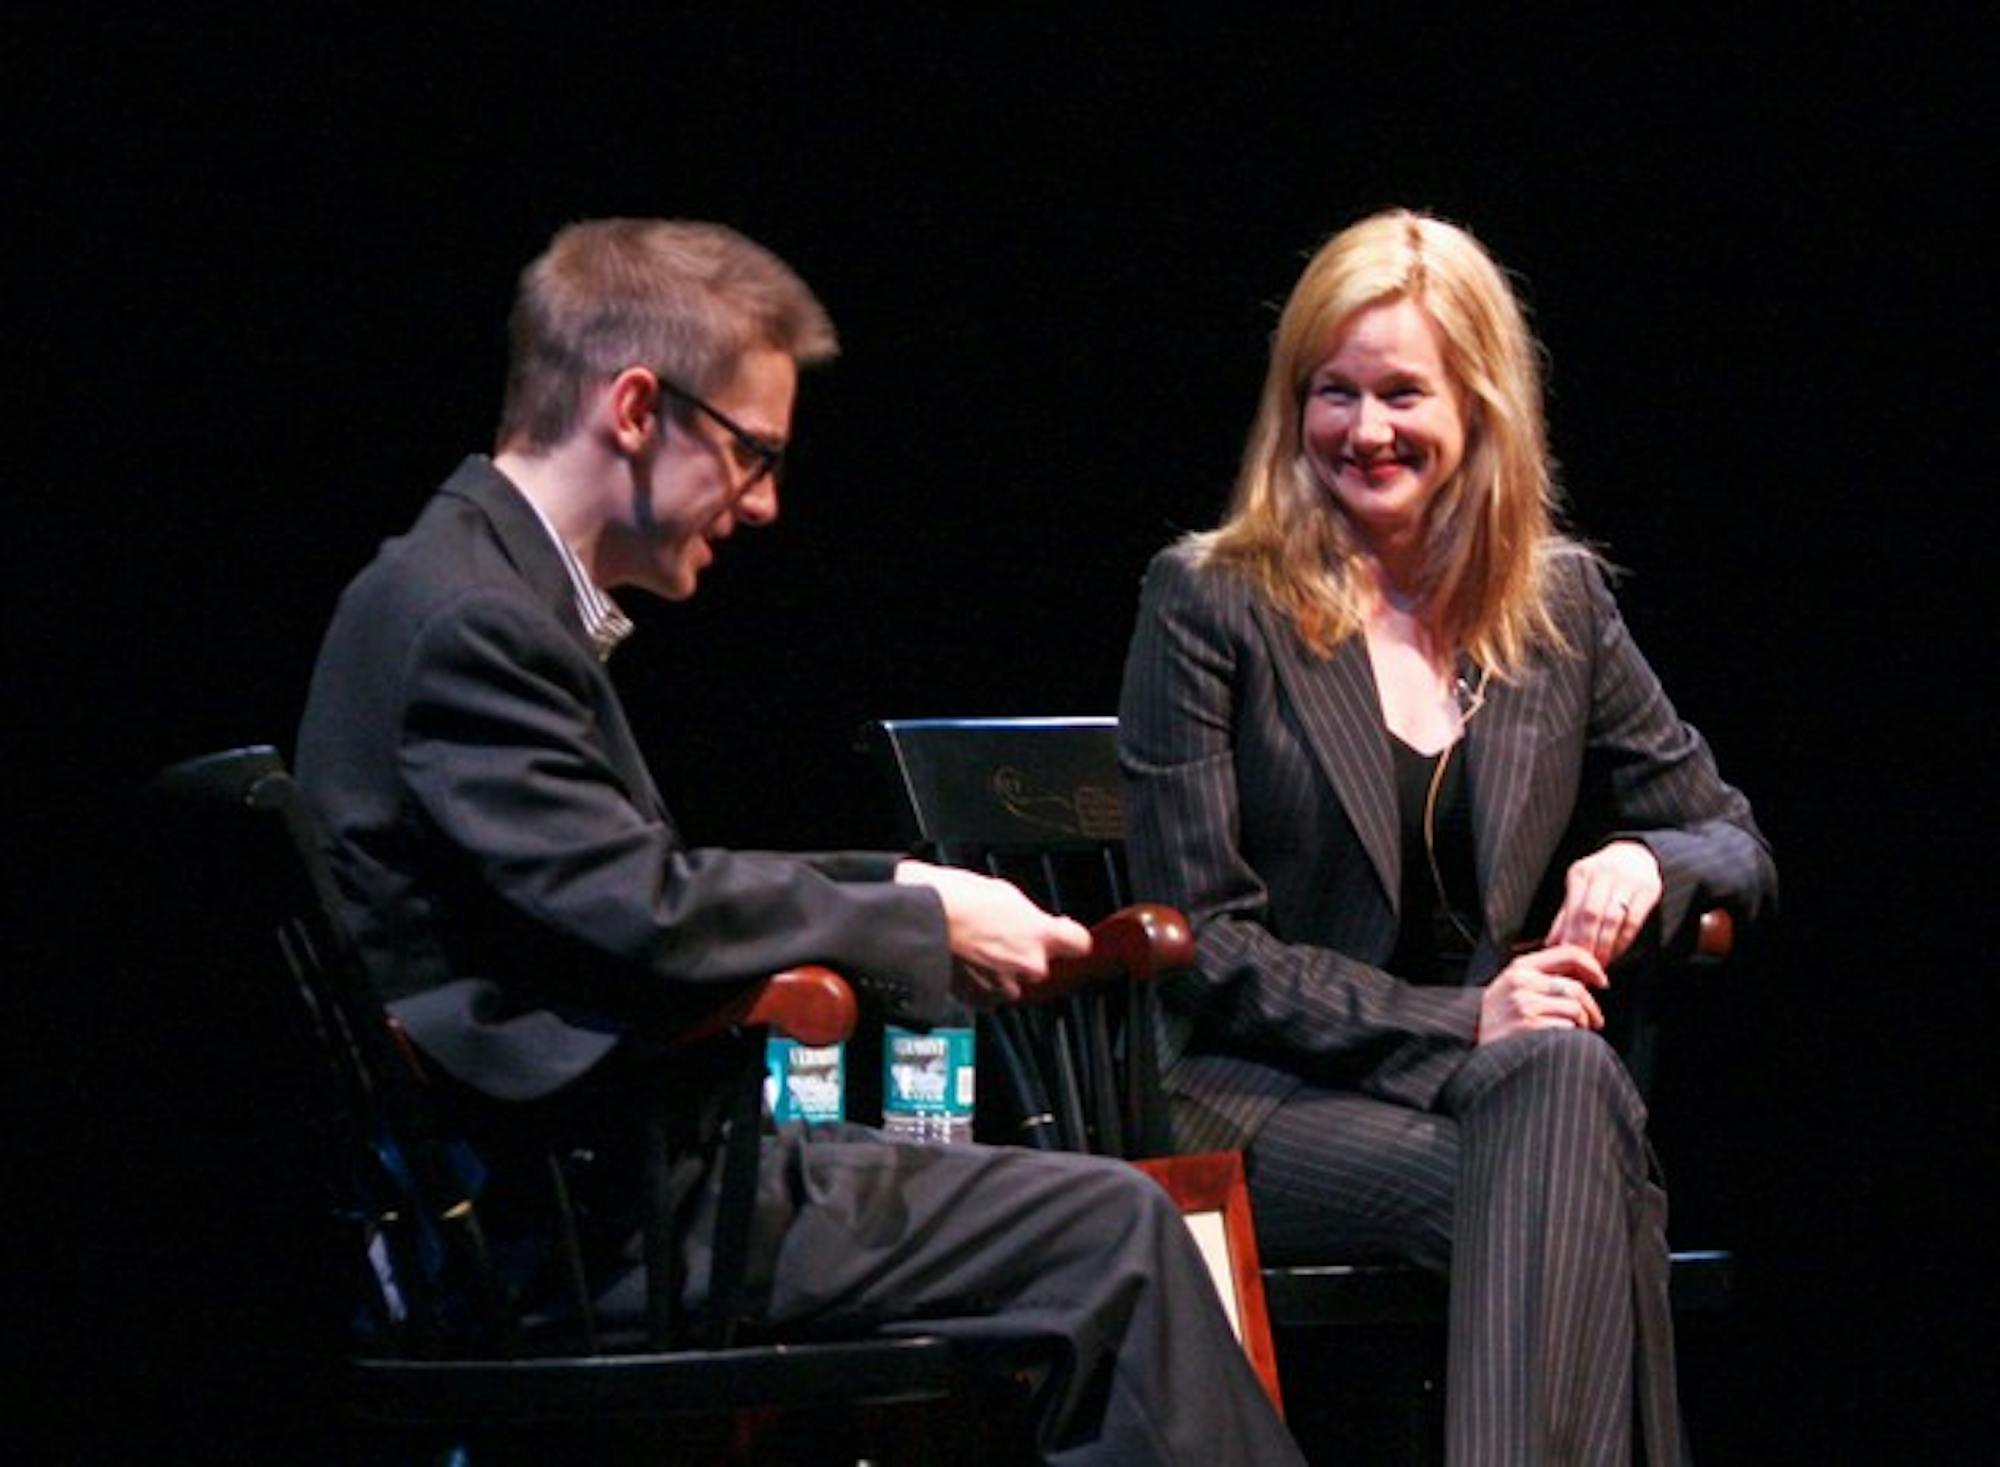 Actress Laura Linney admitted to ignoring her critics in a question-and-answer session at Friday's tribute.